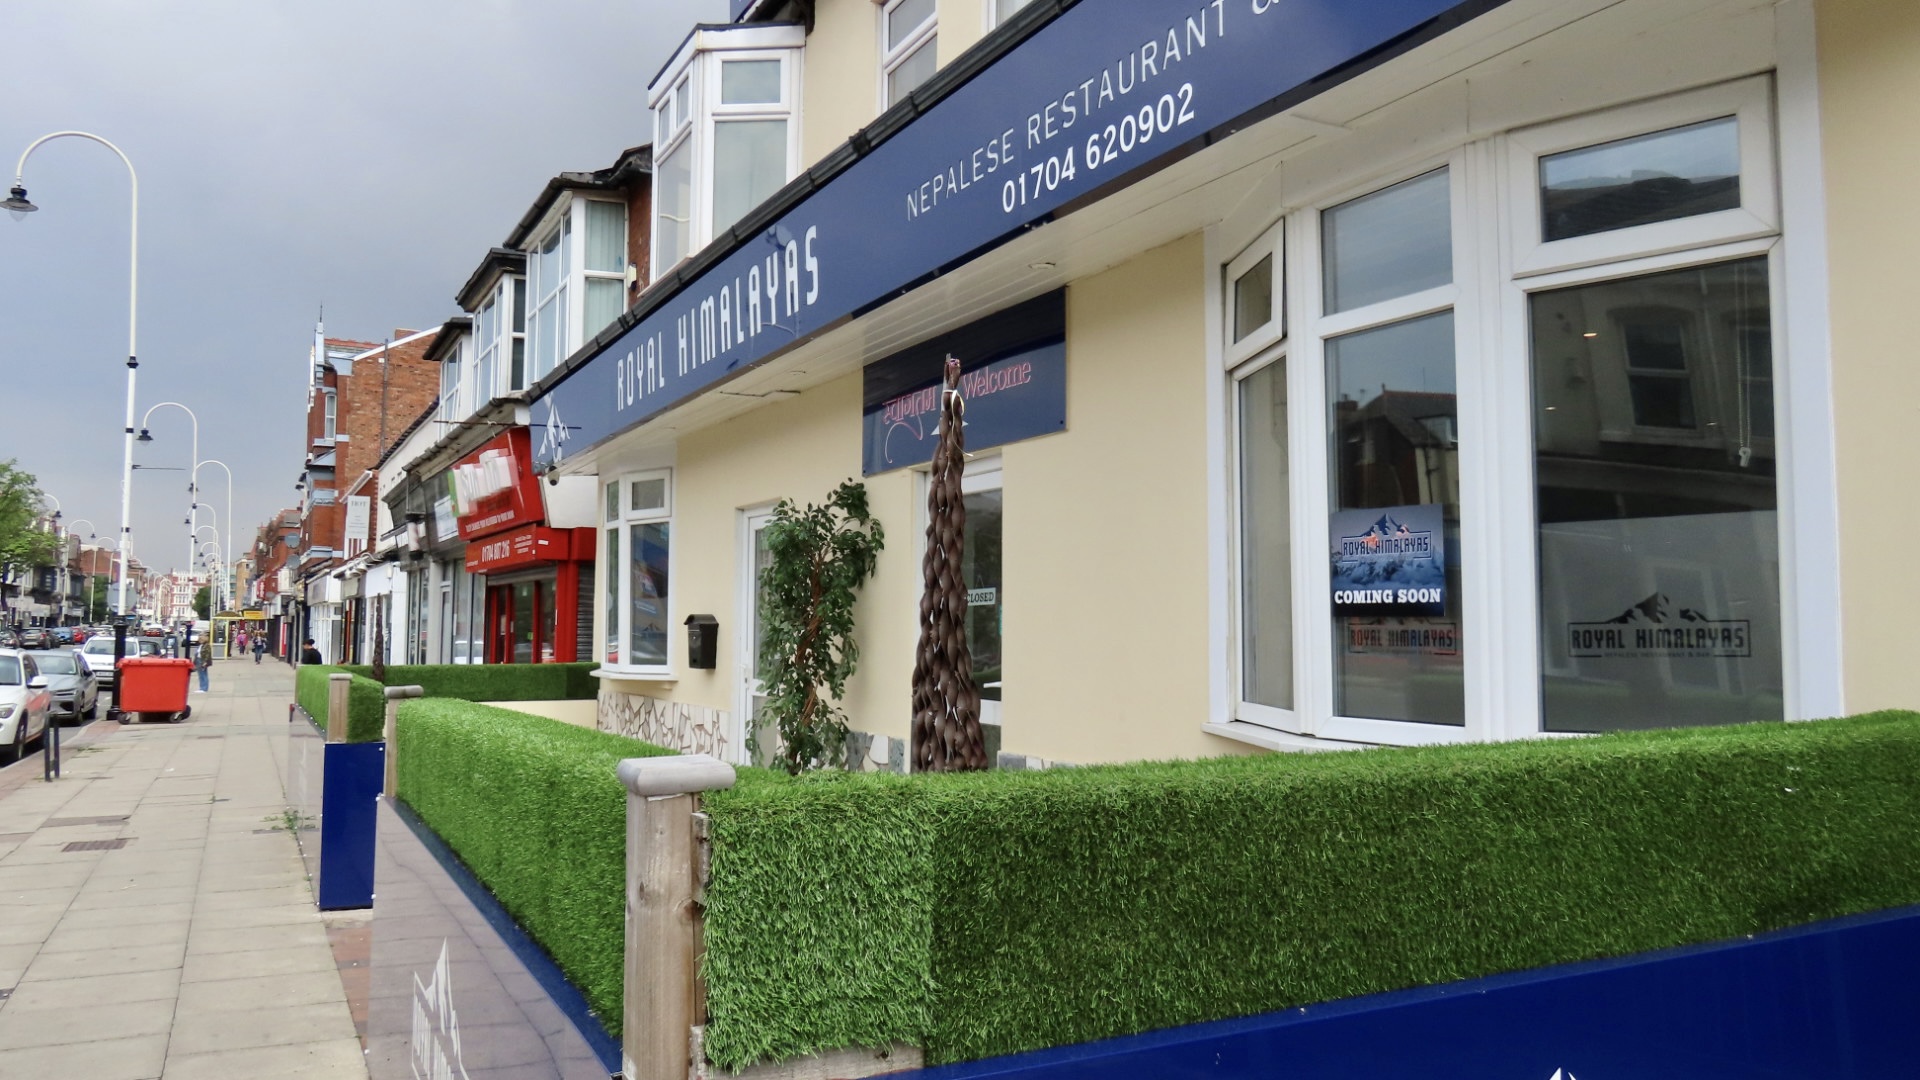 The Royal Himalayas restaurant and bar is opening on Eastbank Street in Southport town centre. 